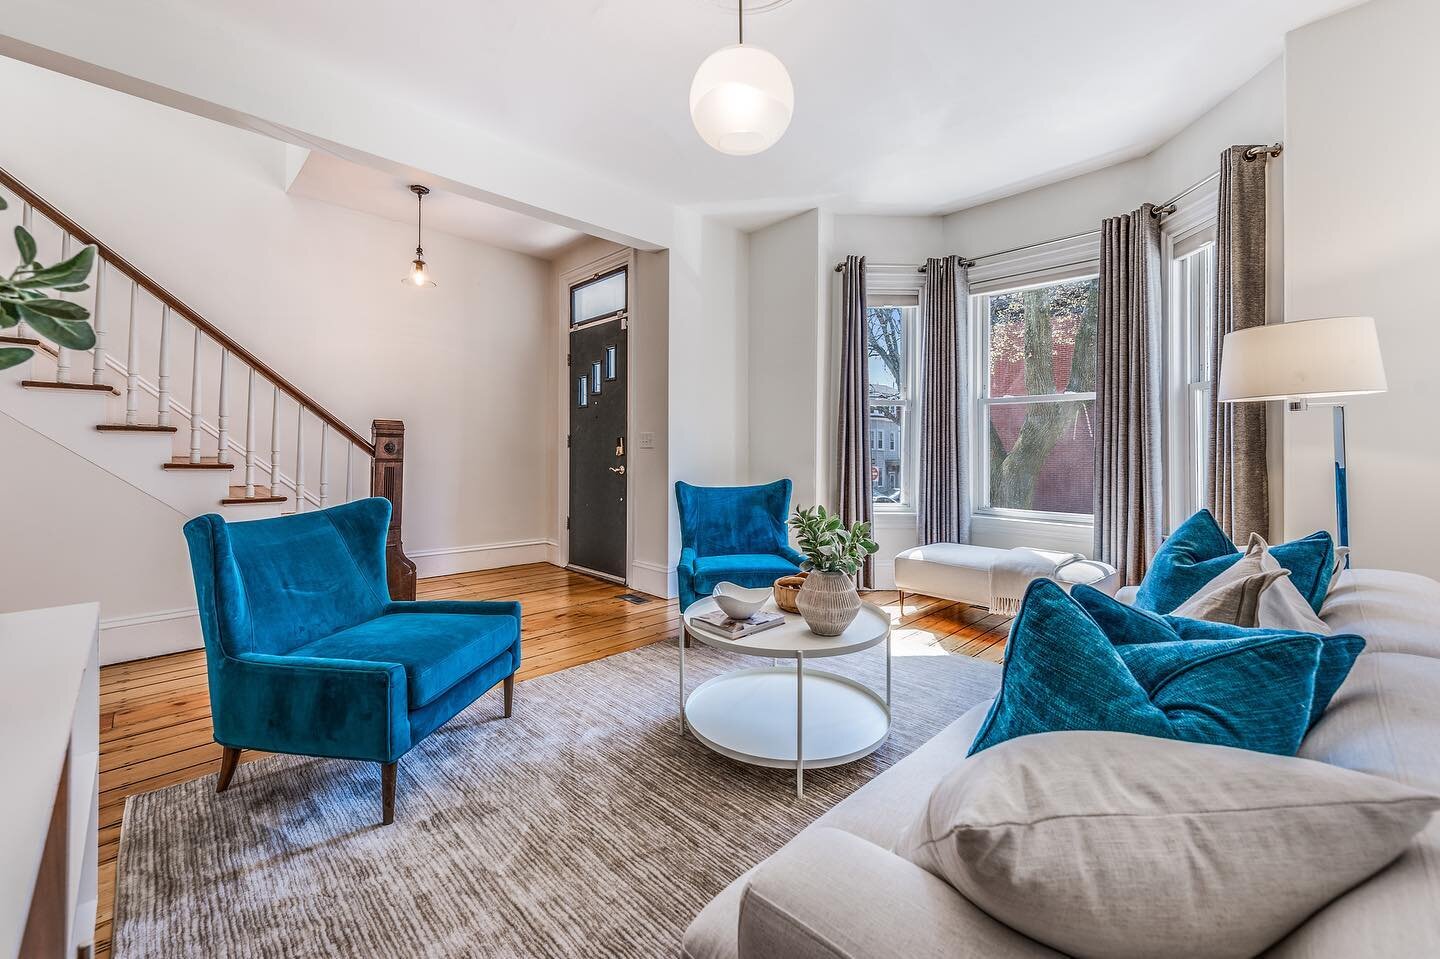 Just Listed in South Boston!

This stunning single family home boasts the perfect blend between original character and contemporary finishes. Featuring high ceilings, modern light fixtures, refinished original hardwood floors, stainless steel applian